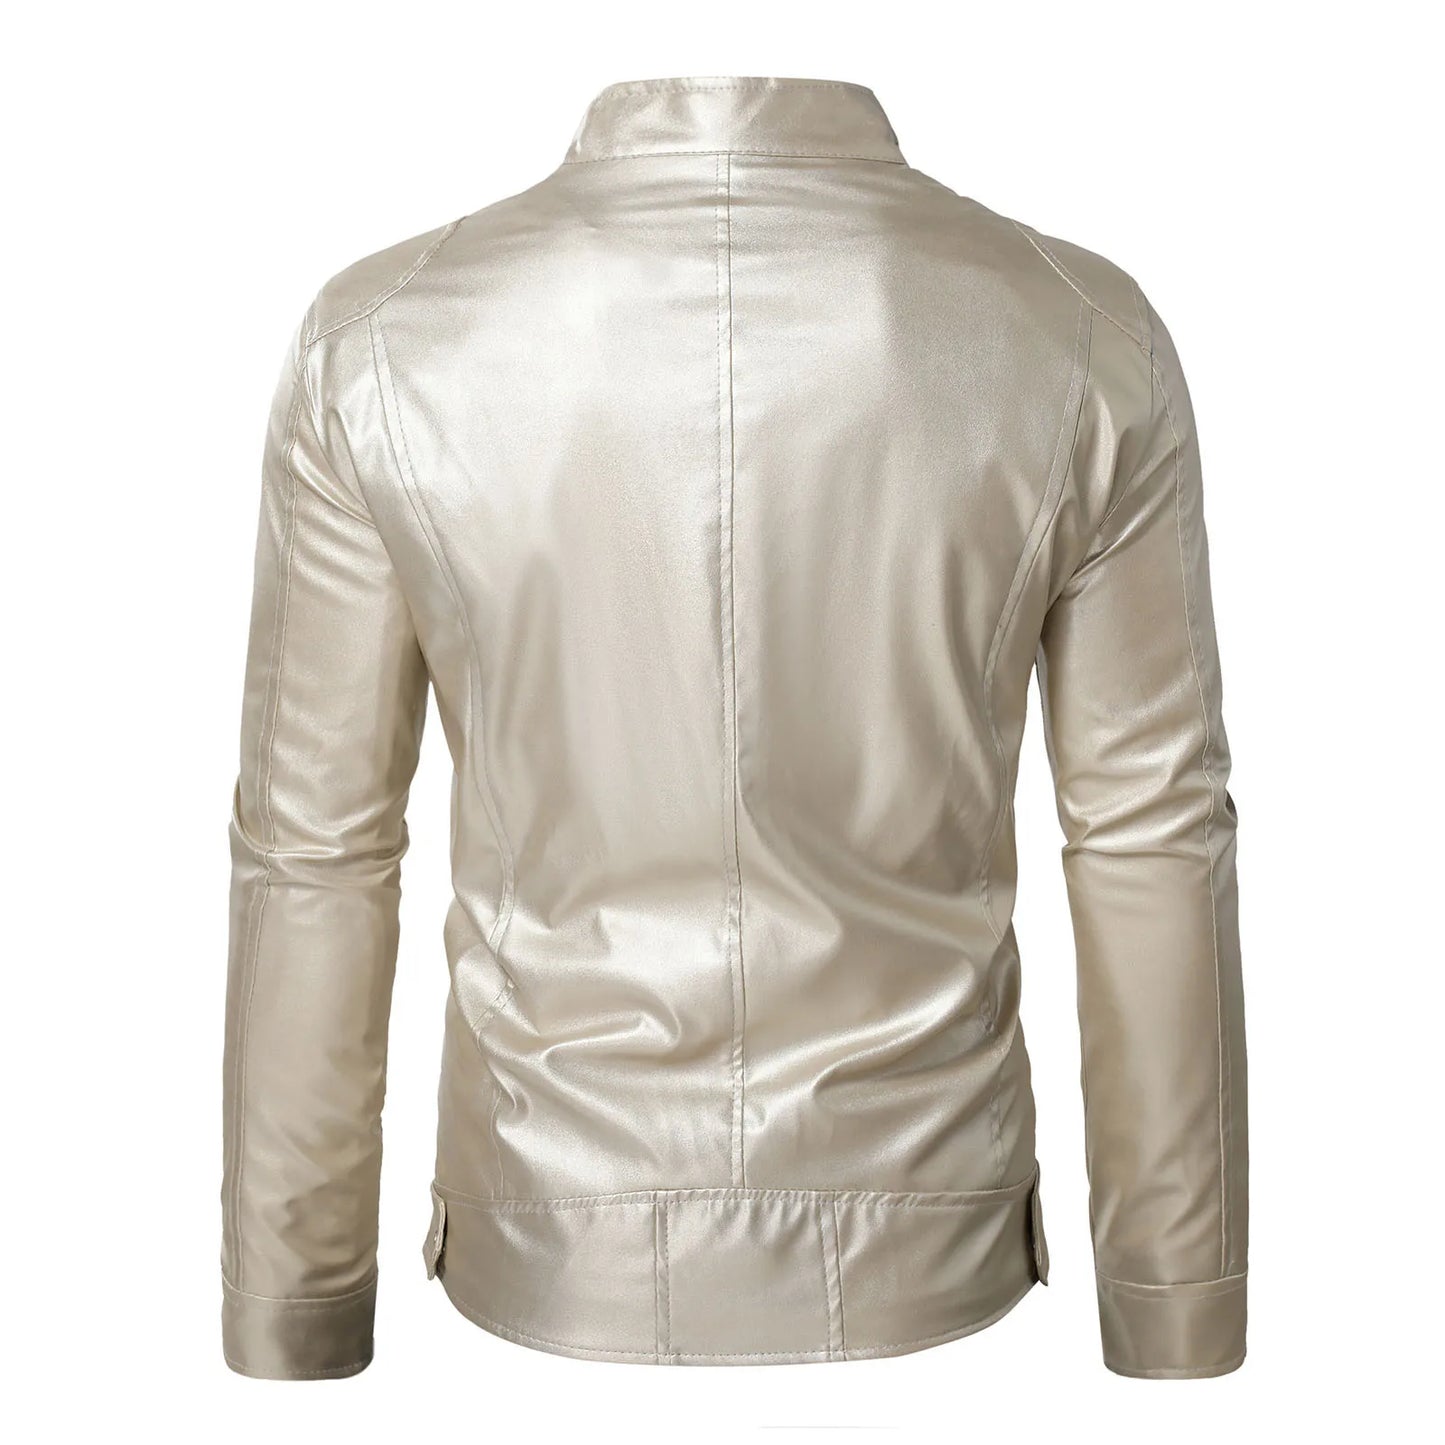 Shiny Gold Leather Jackets For Men